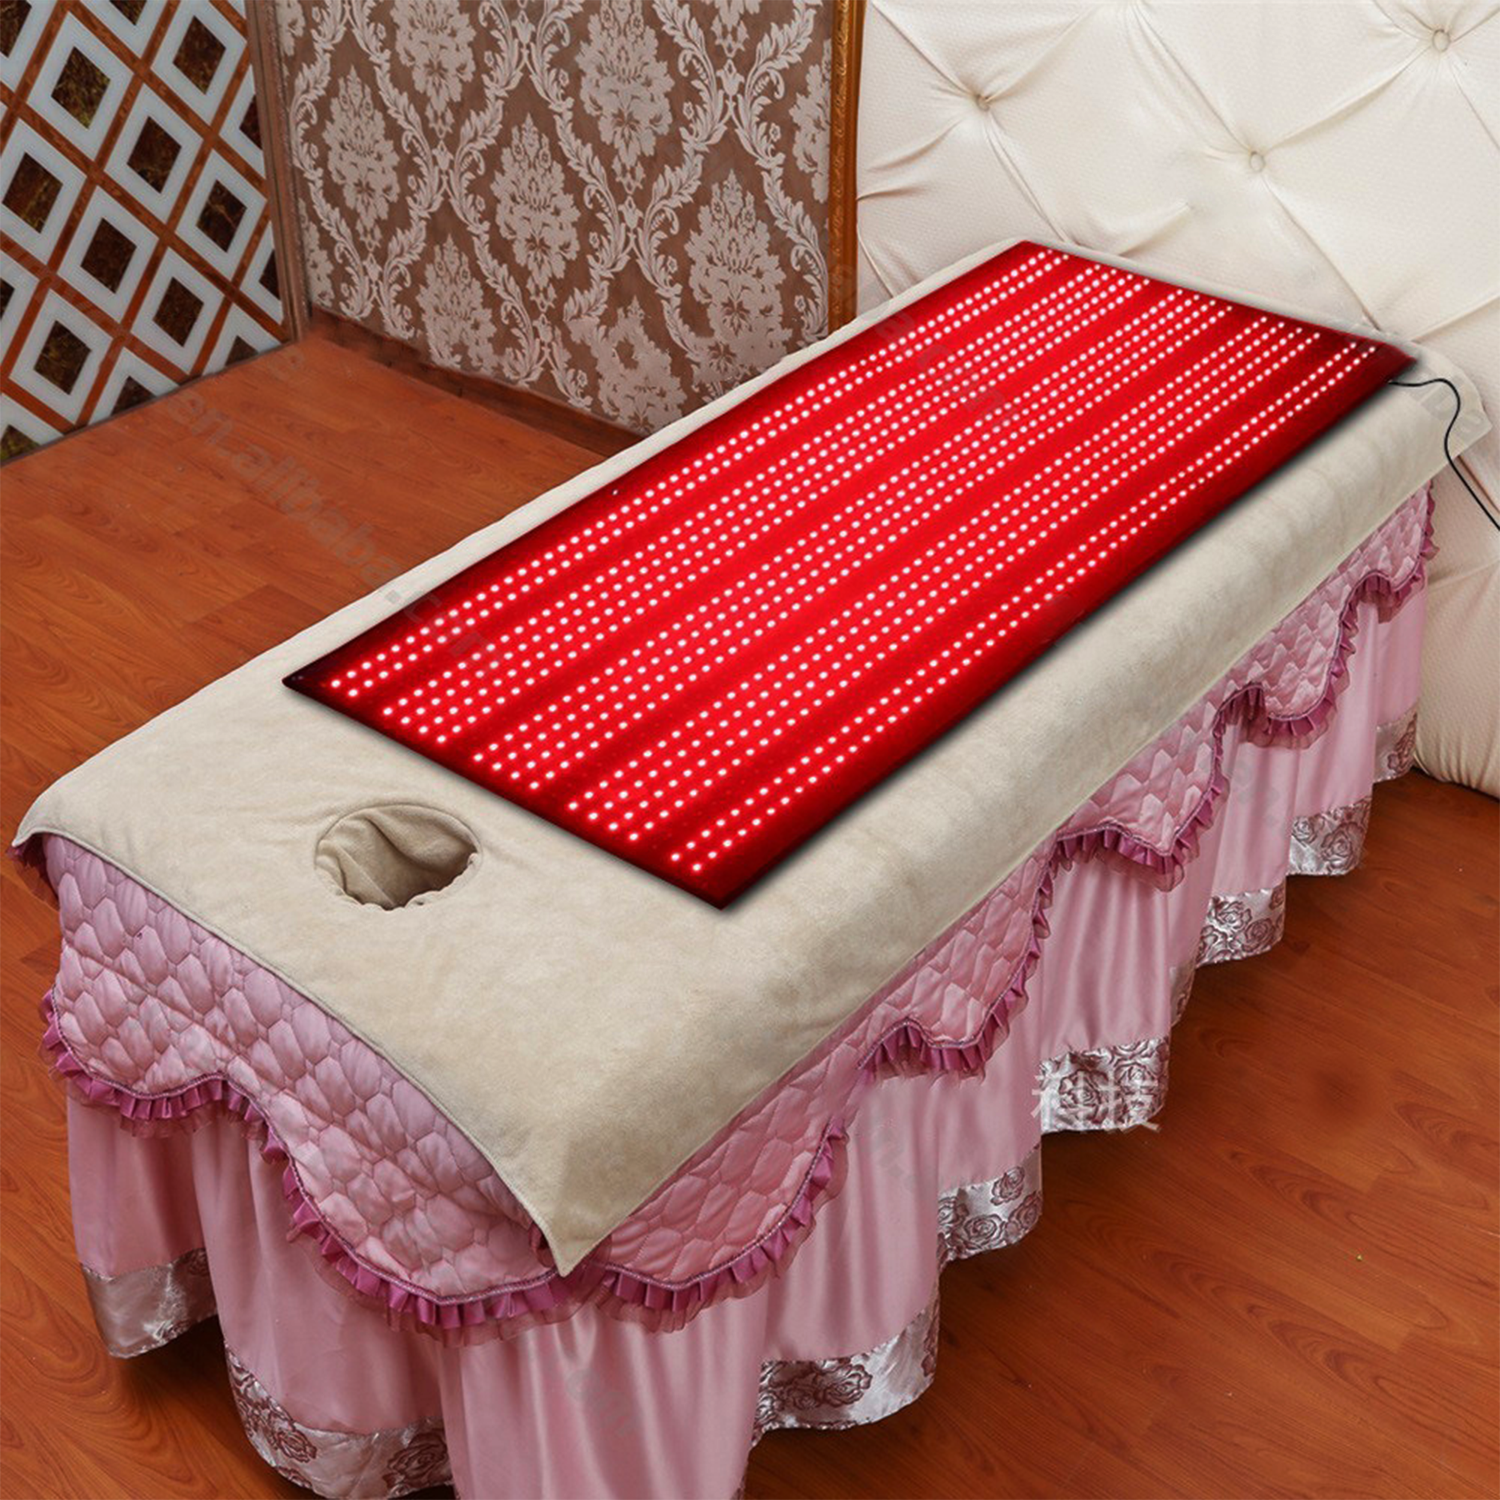 red light therapy mats